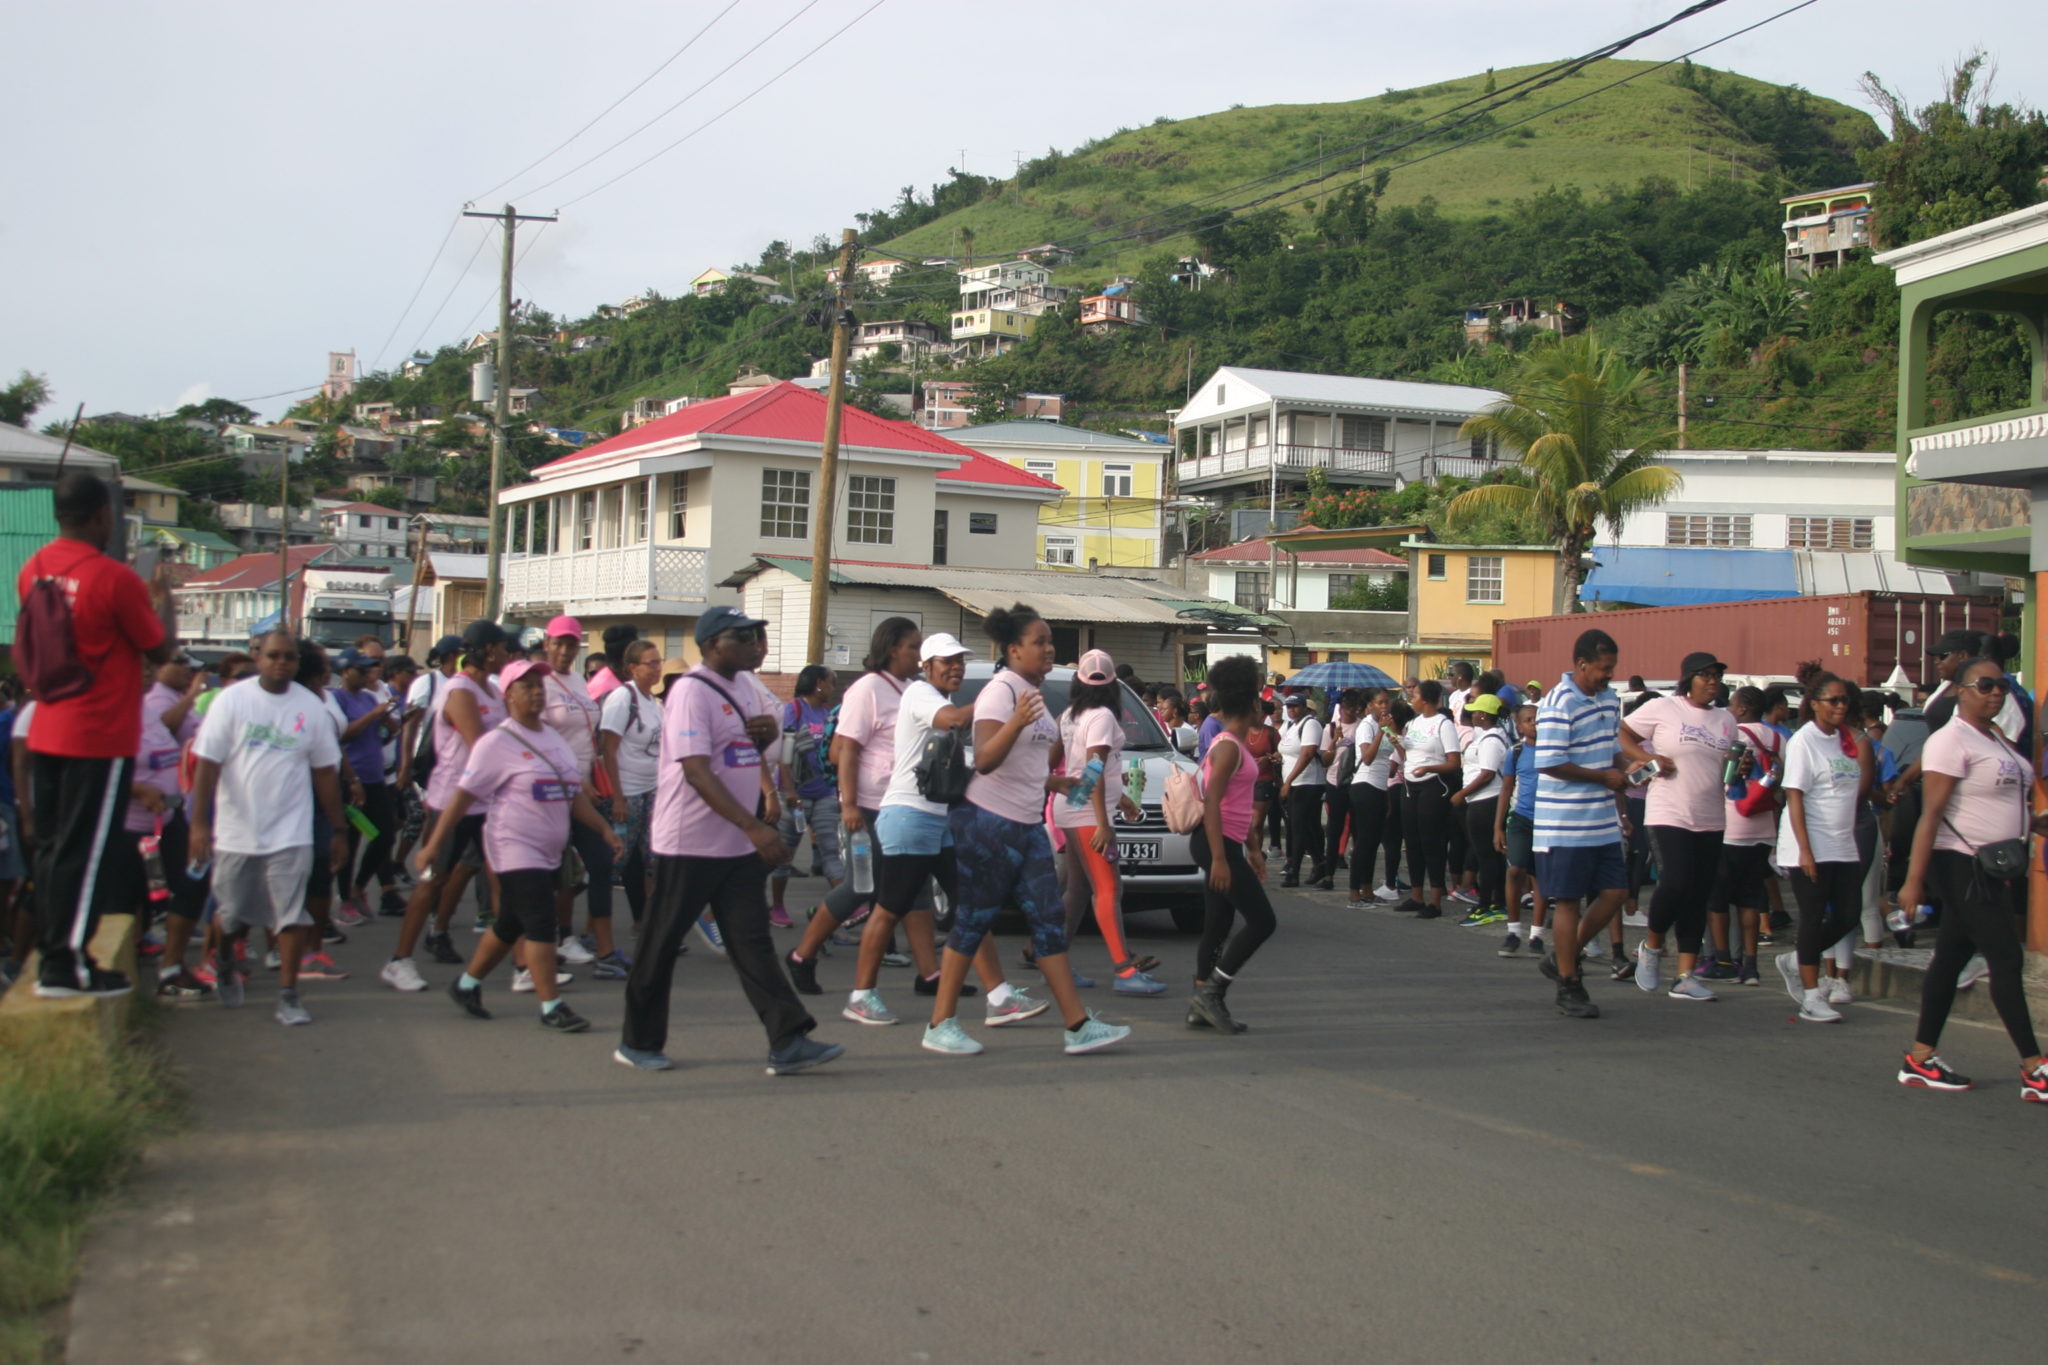 CIBC FirstCaribbean’s Walk For The Cure Tops  US Half Million Mark In Fundraising For Regional Cancer Causes Last Year